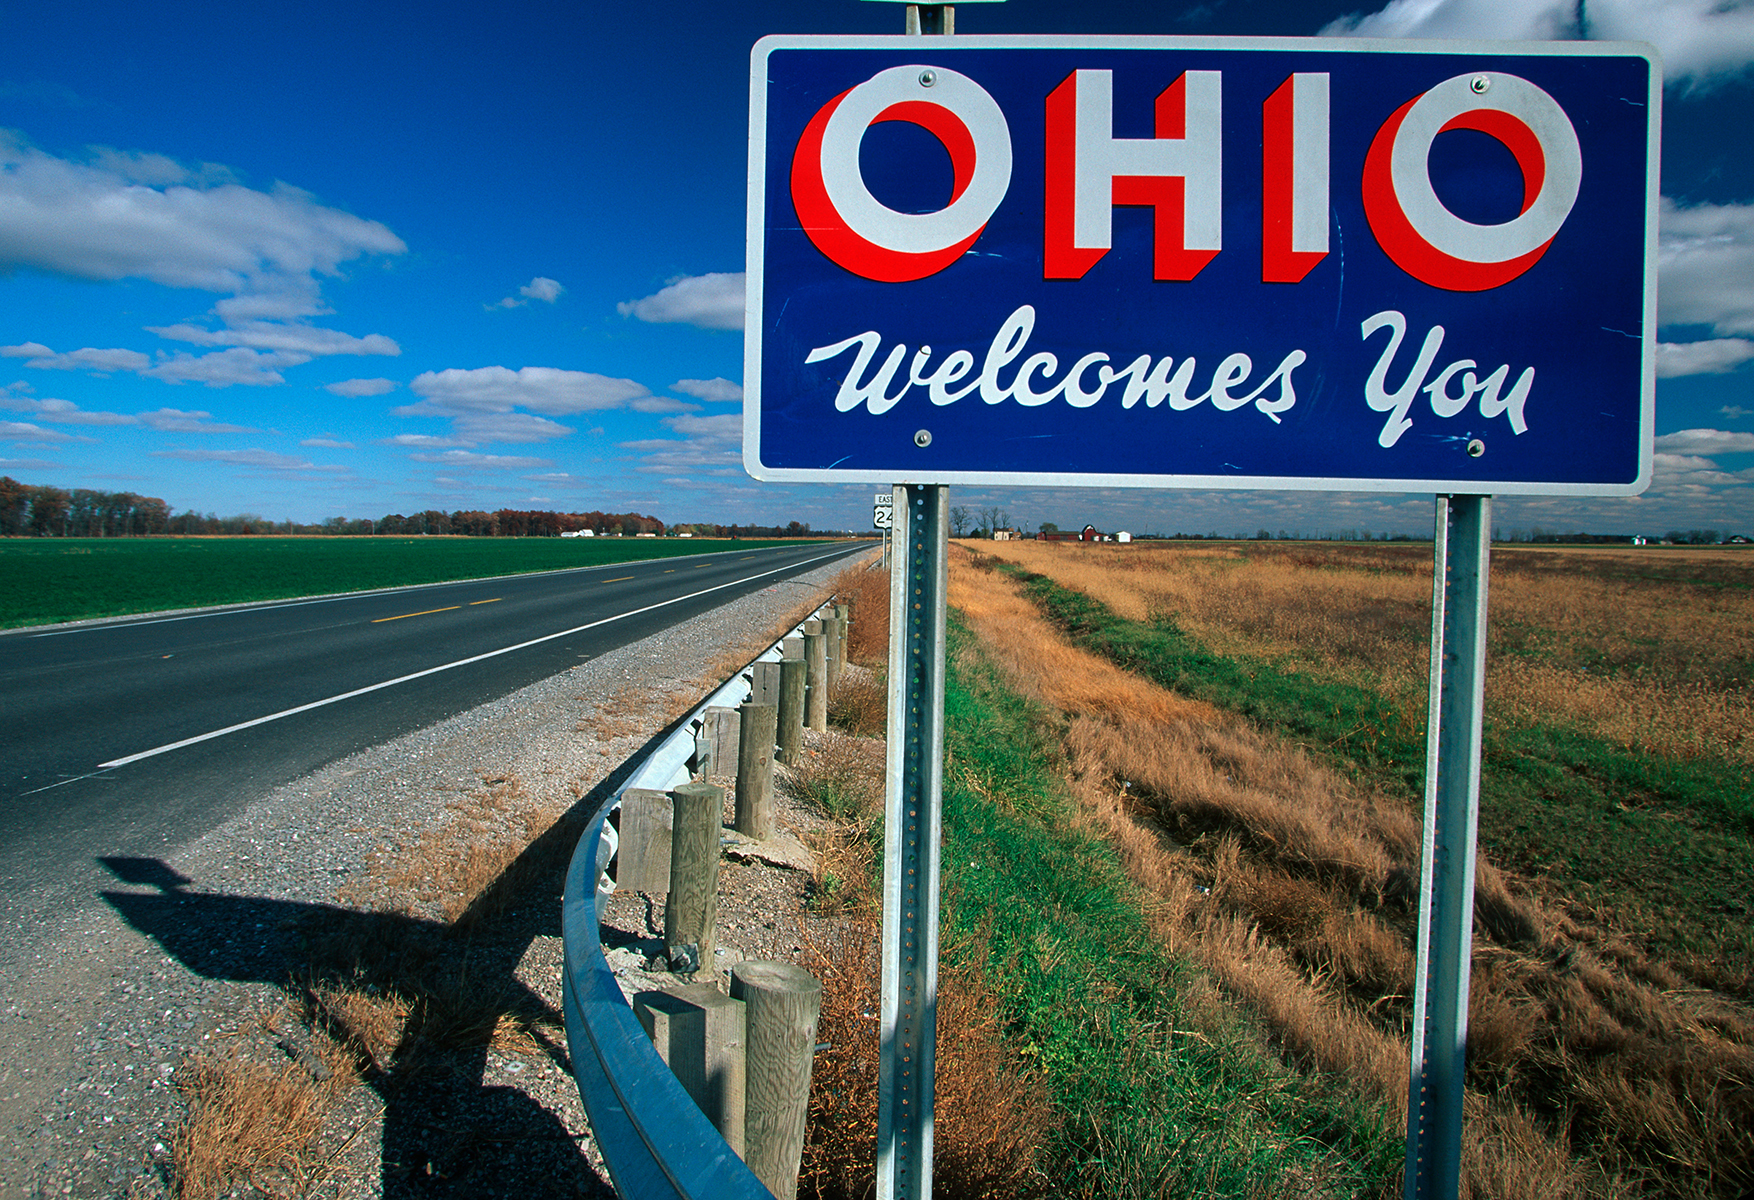 "Ohio welcomes you" sign on the highway, amongst grass and blue sky